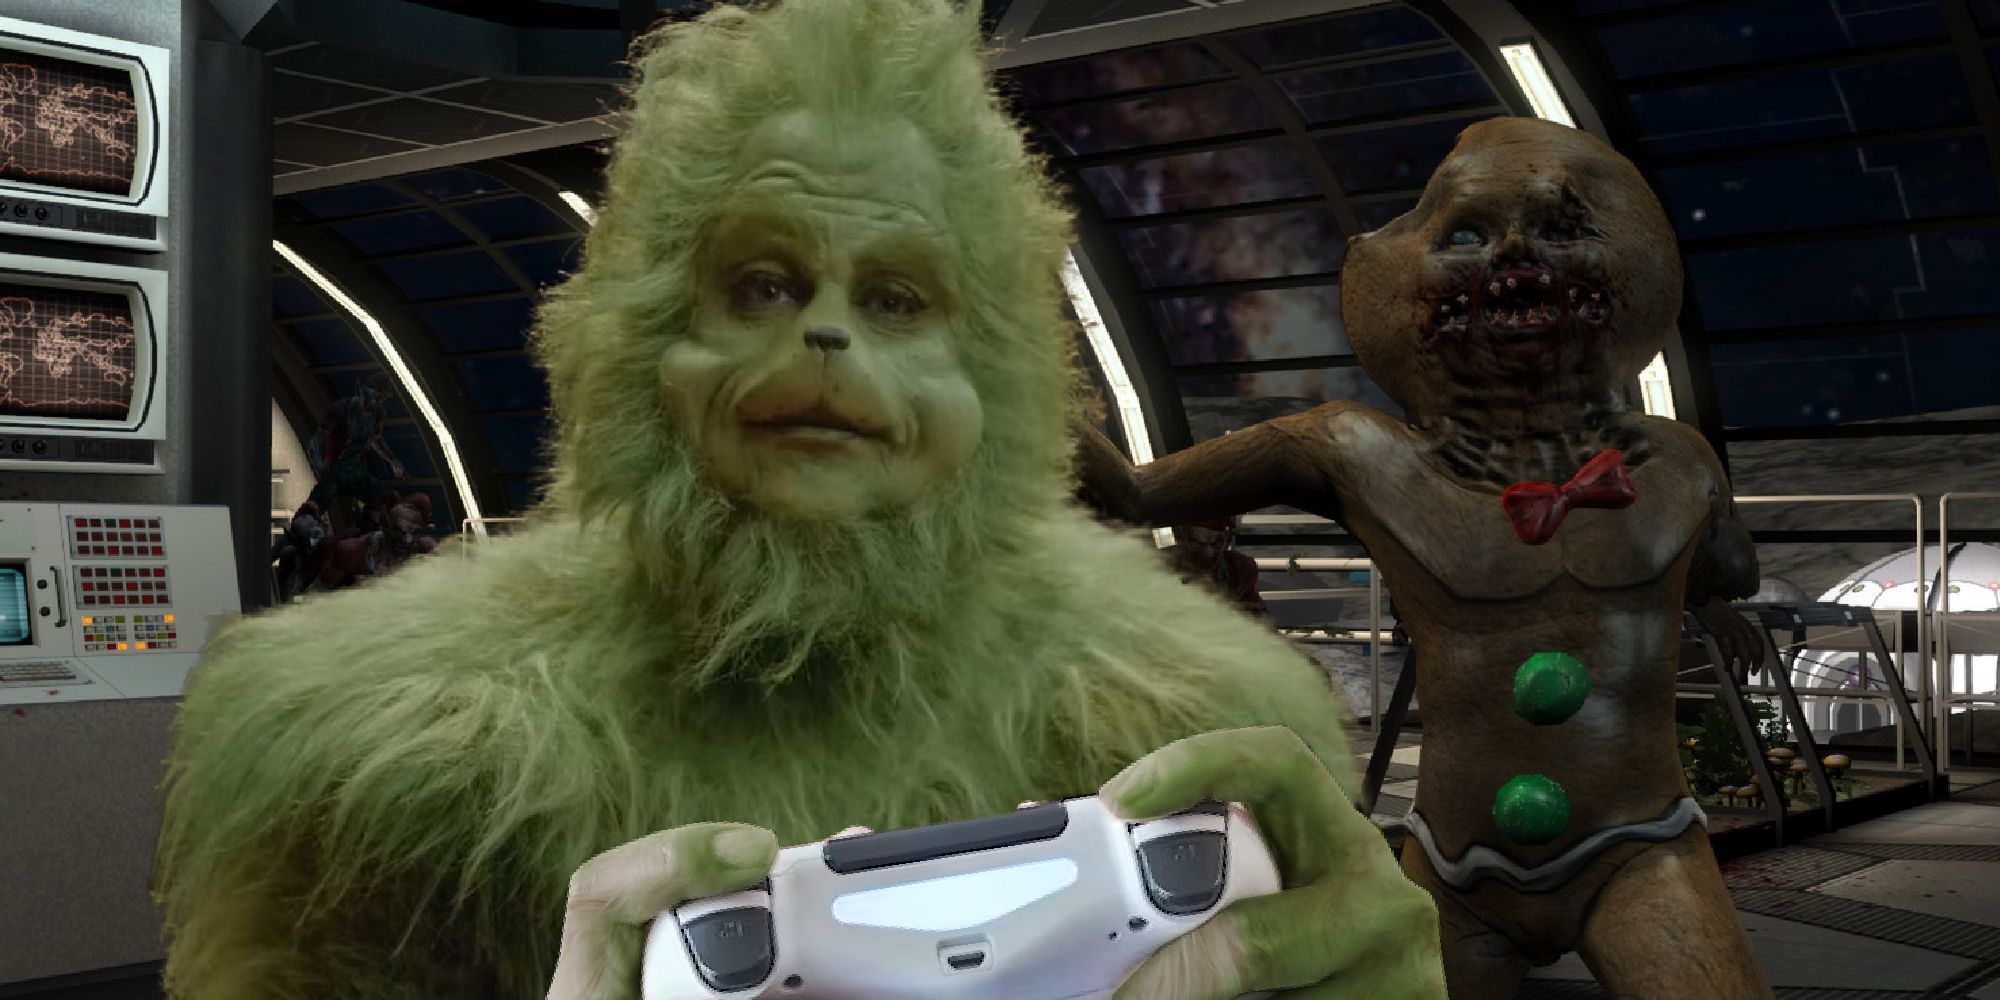 The Grinch holding a PlayStation controller in front of a gingerbread zombie from Killing Floor